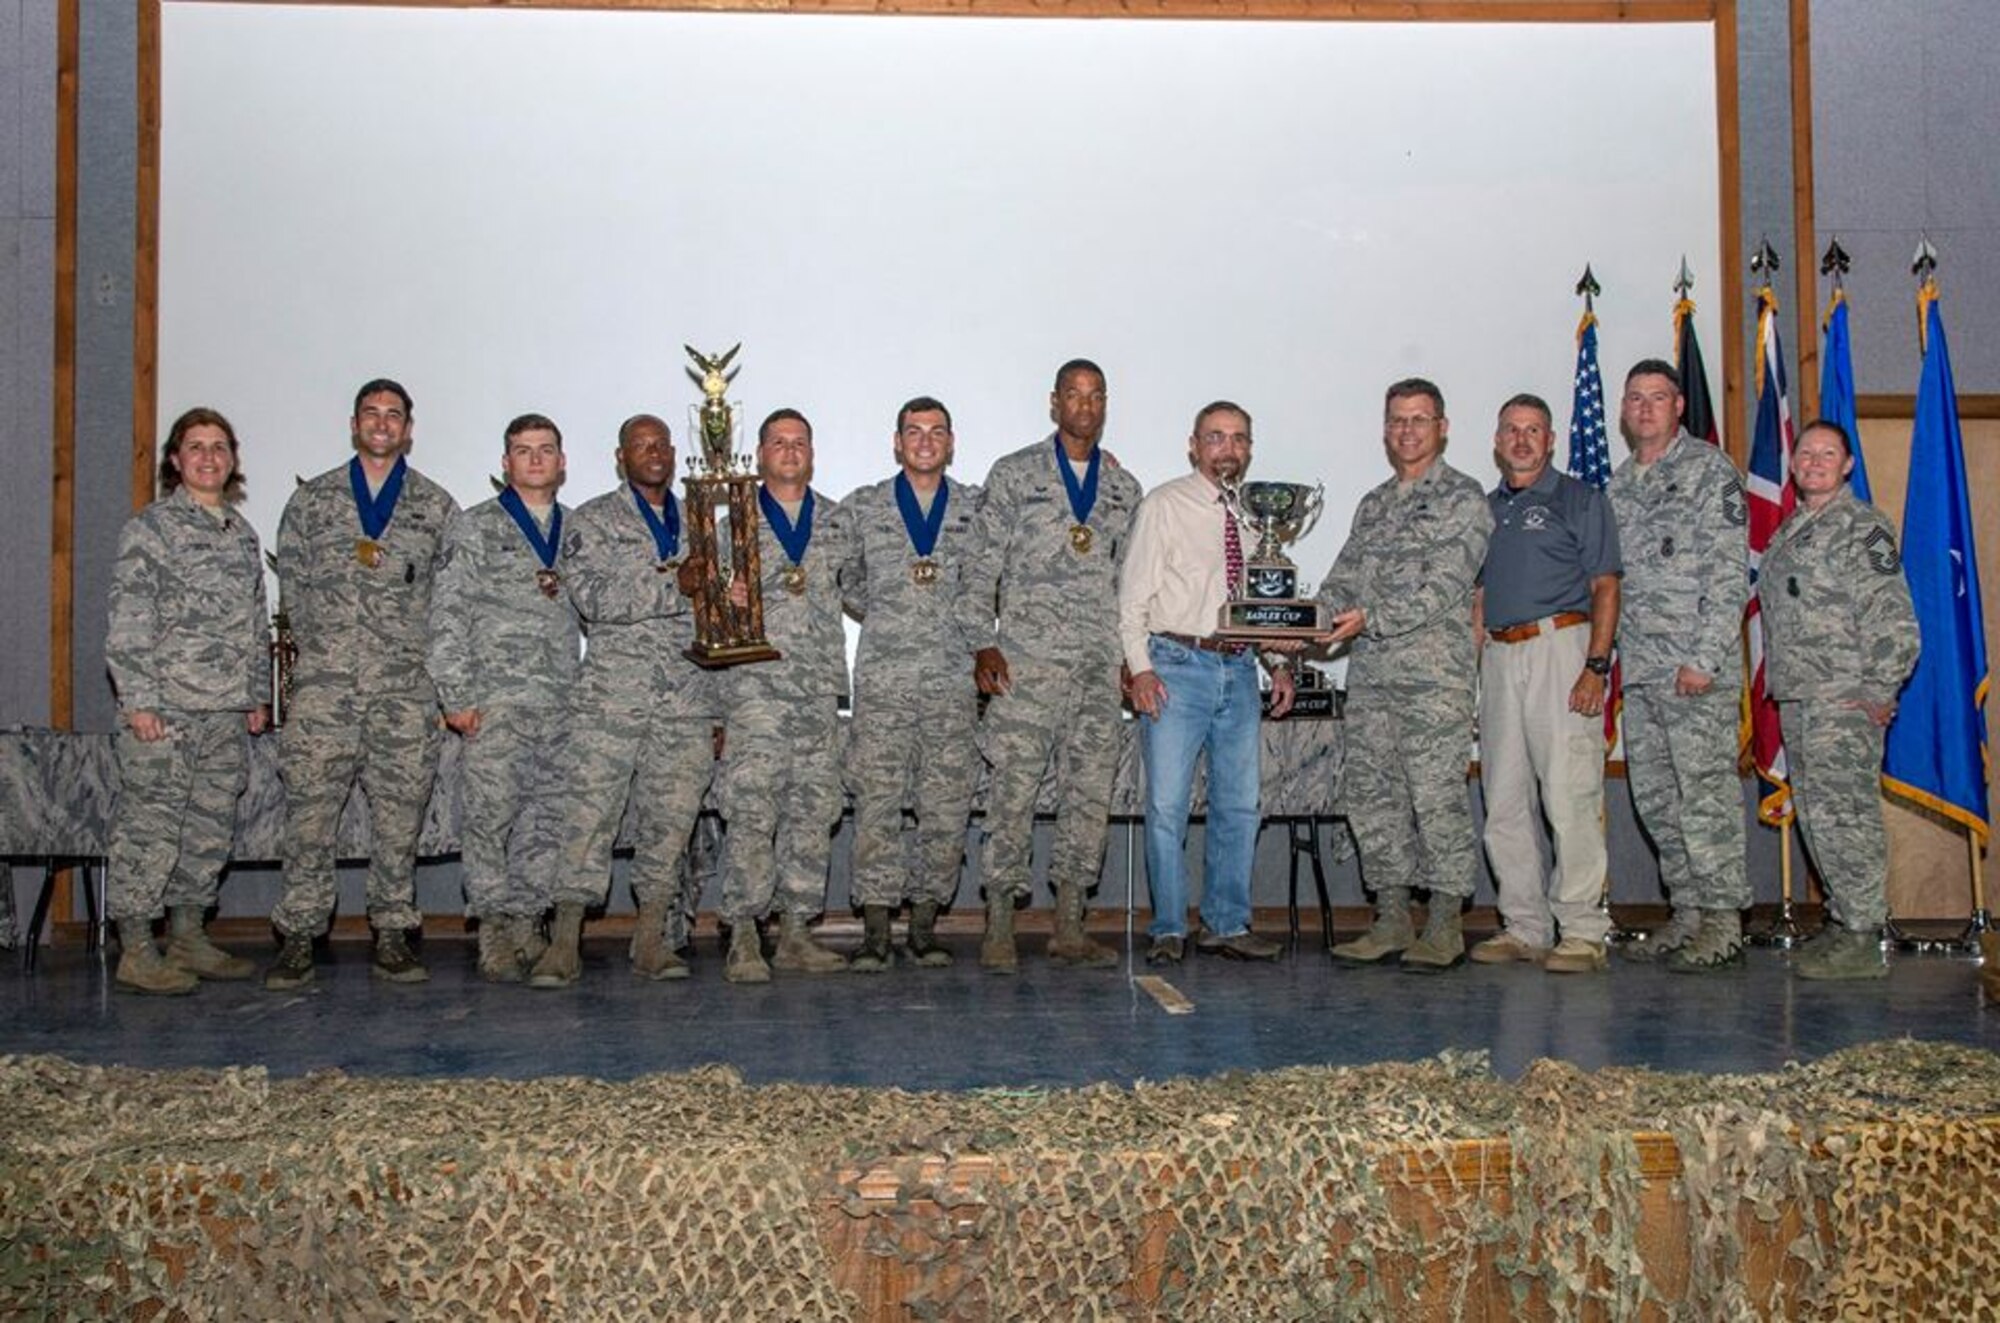 The Air Mobility Command team receives the Sadler Cup for best final score in dismounted operations during the 2018 Defender Challenge award ceremony at Joint Base San Antonio, Texas, Sept. 13, 2018.  The objective of the challenge was to measure strength, endurance, agility, teamwork, leadership, problem-solving and knowledge of core skills. (Courtesy Photo)